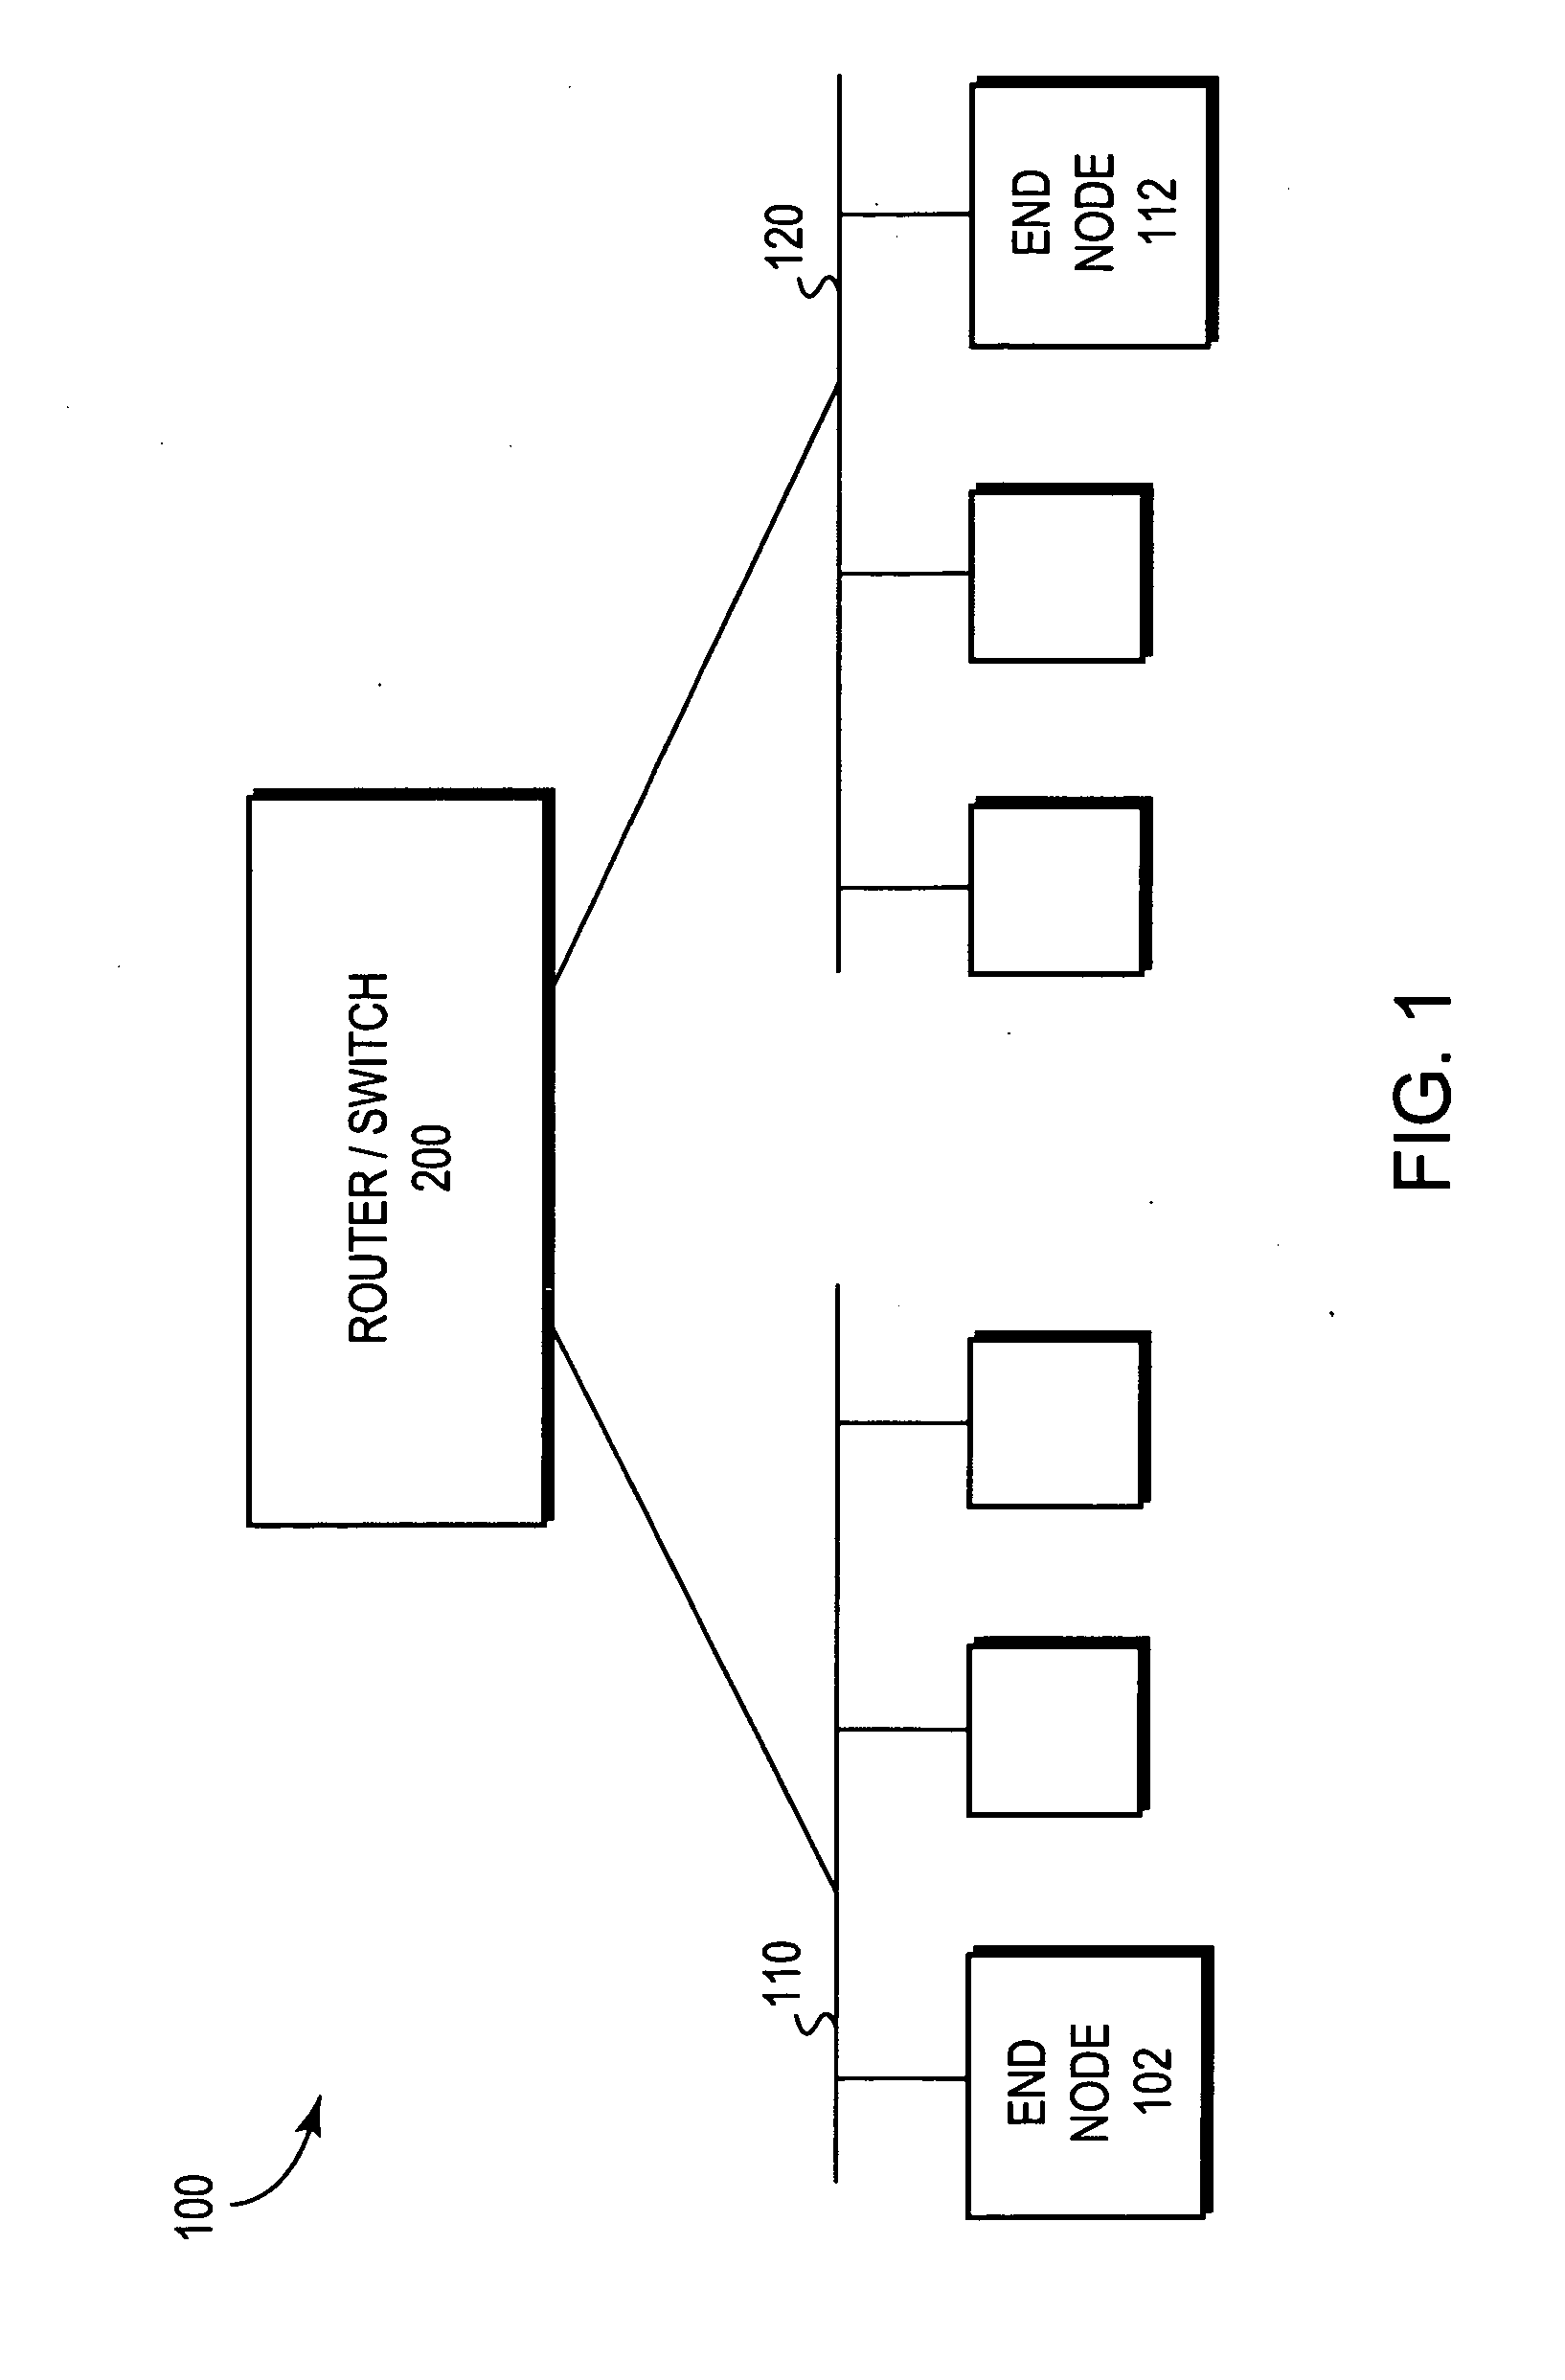 System and method for dynamic ordering in a network processor